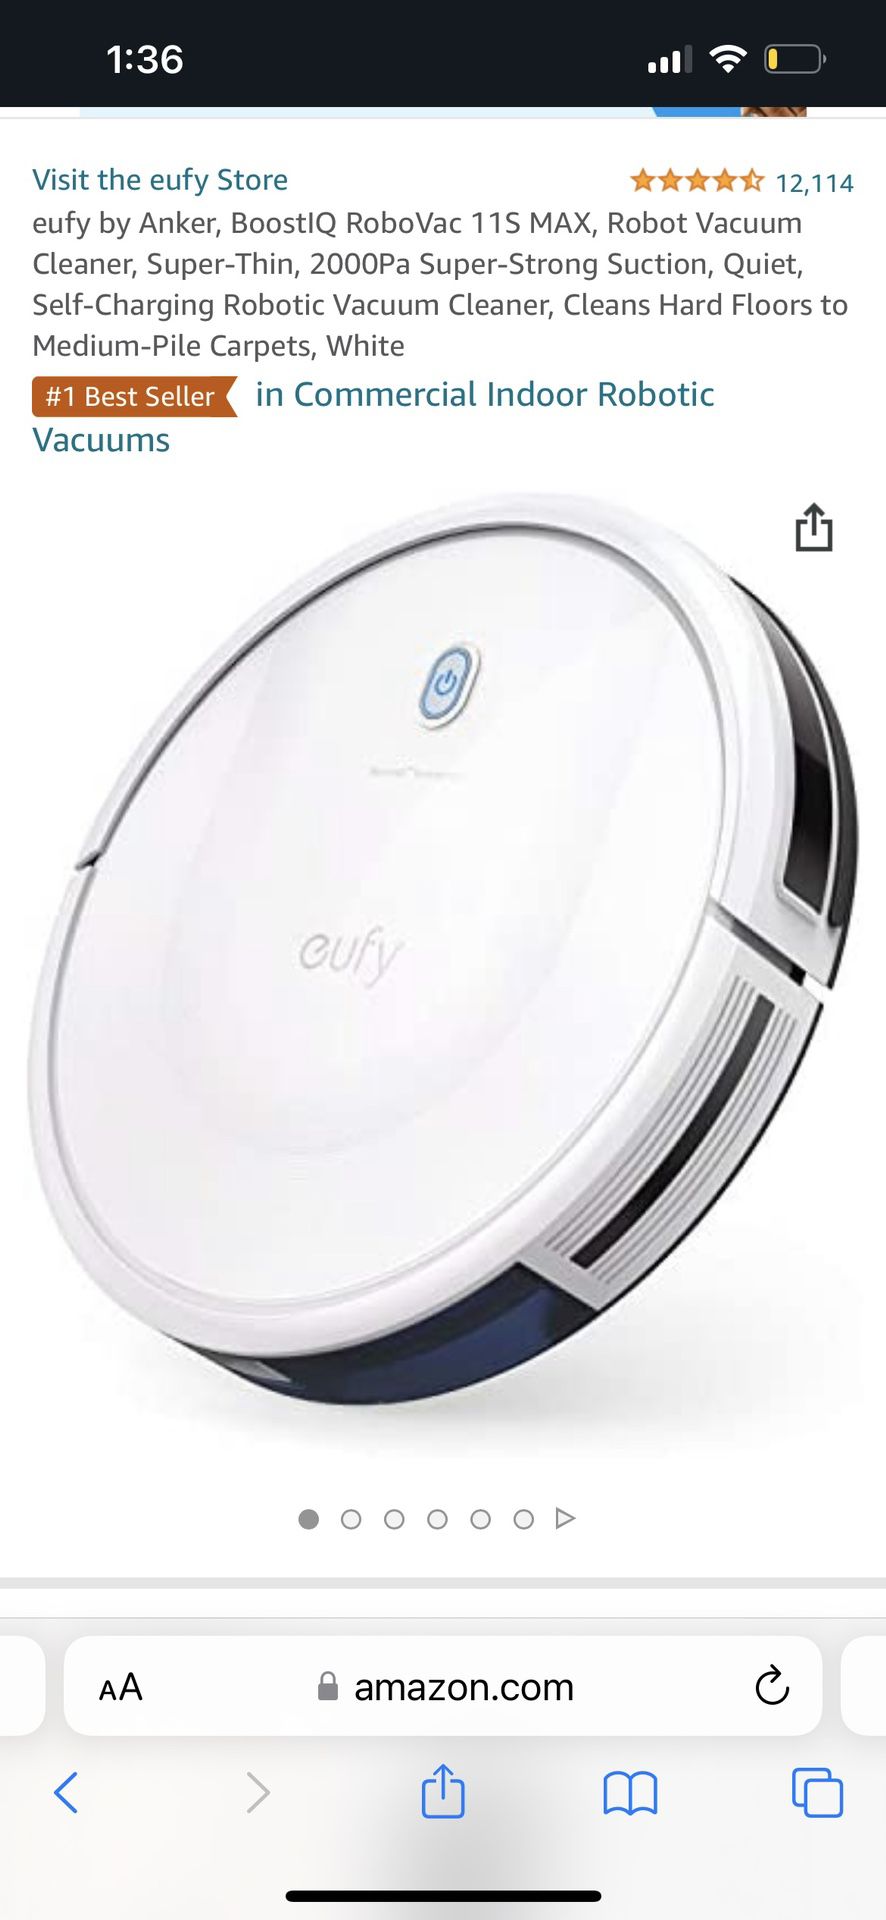 eufy by Anker, BoostIQ RoboVac 11S MAX, Robot Vacuum Cleaner, Super-Thin, 2000Pa Super-Strong Suction, Quiet, Self-Charging Robotic Vacuum Cleaner, Cl